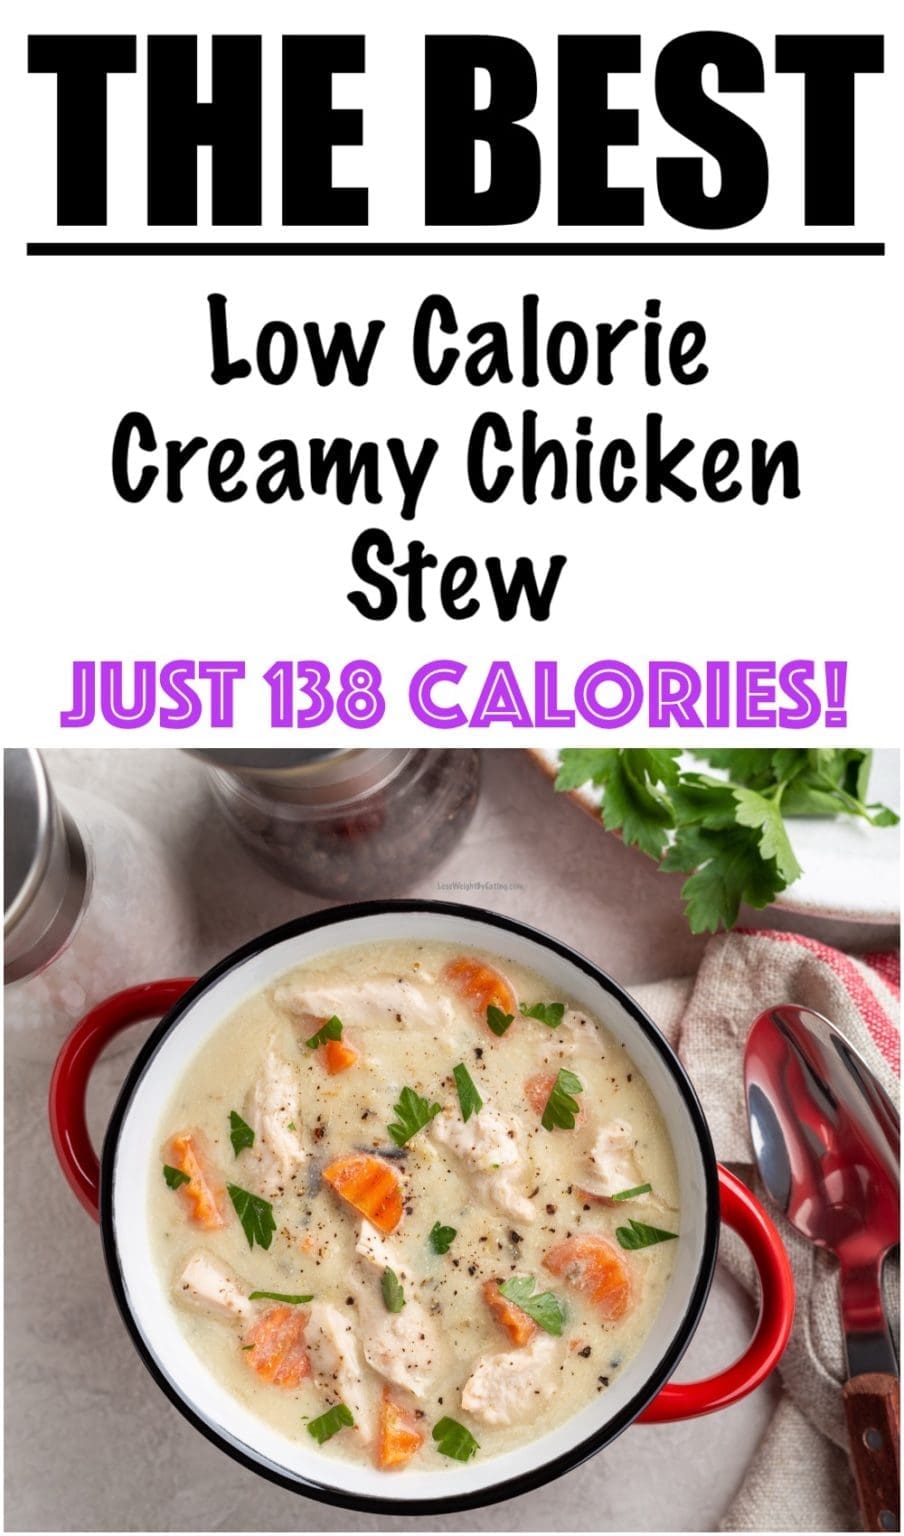 Low Calorie Creamy Chicken Stew in Crockpot - Lose Weight By Eating